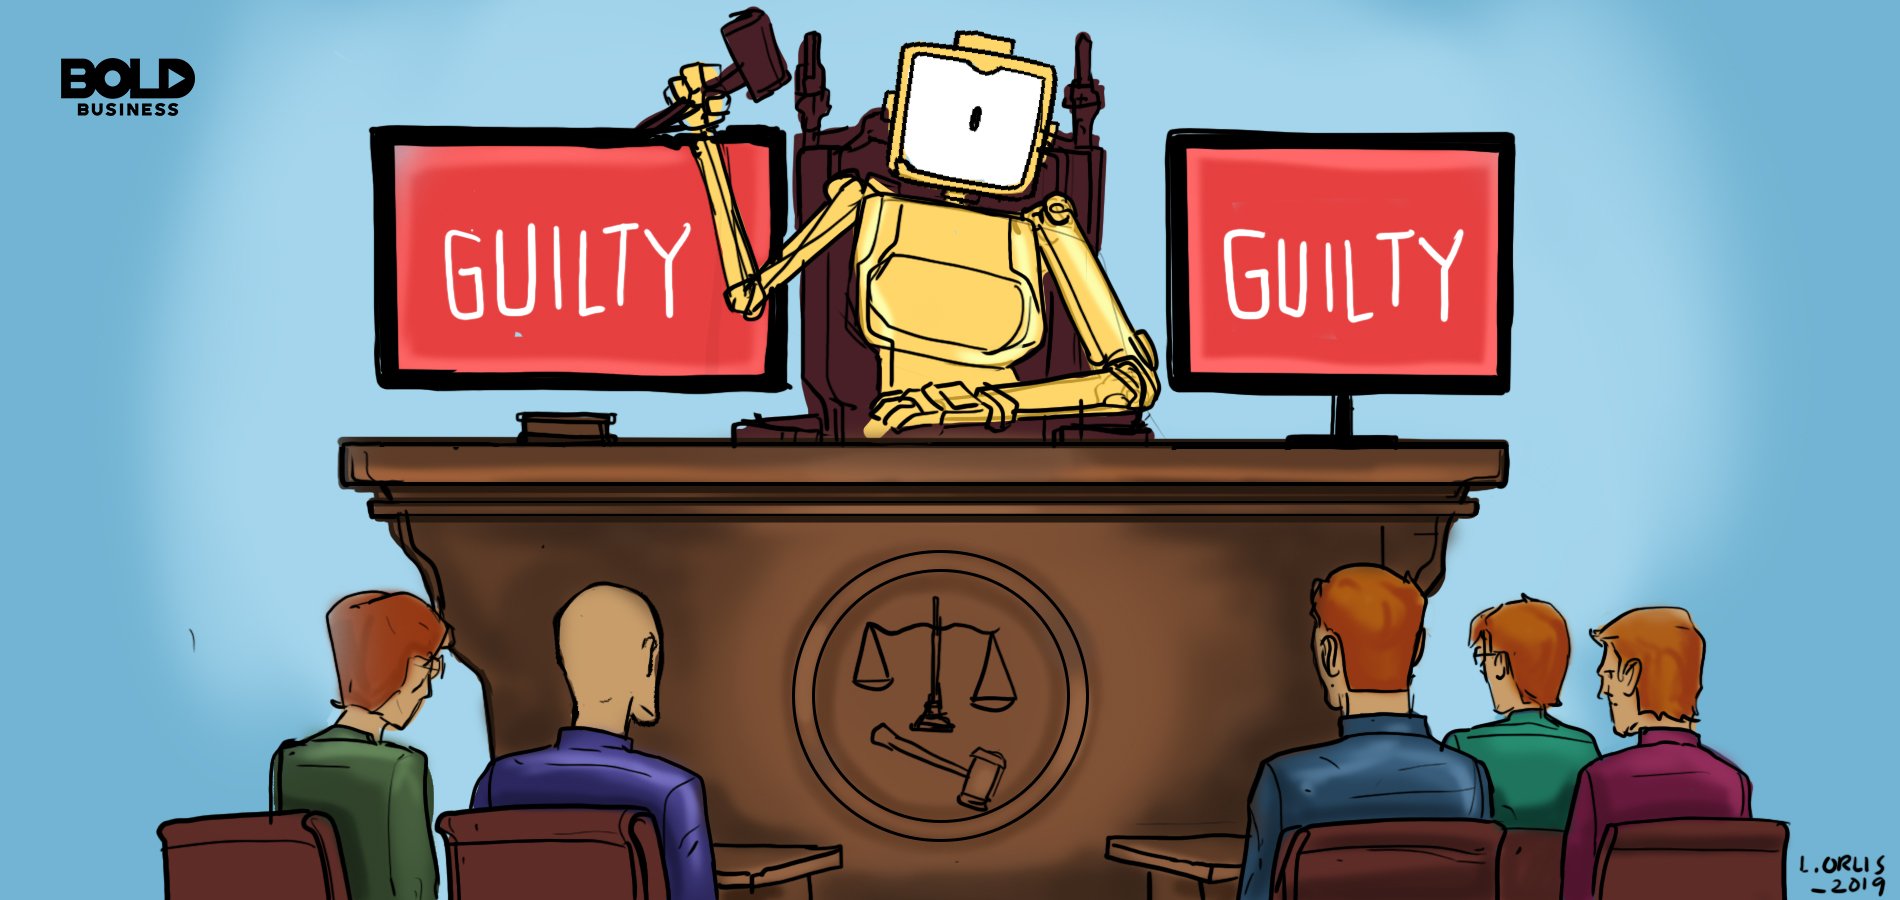 Artificial-Intelligence-in-the-Courtroom-infographic.jpg